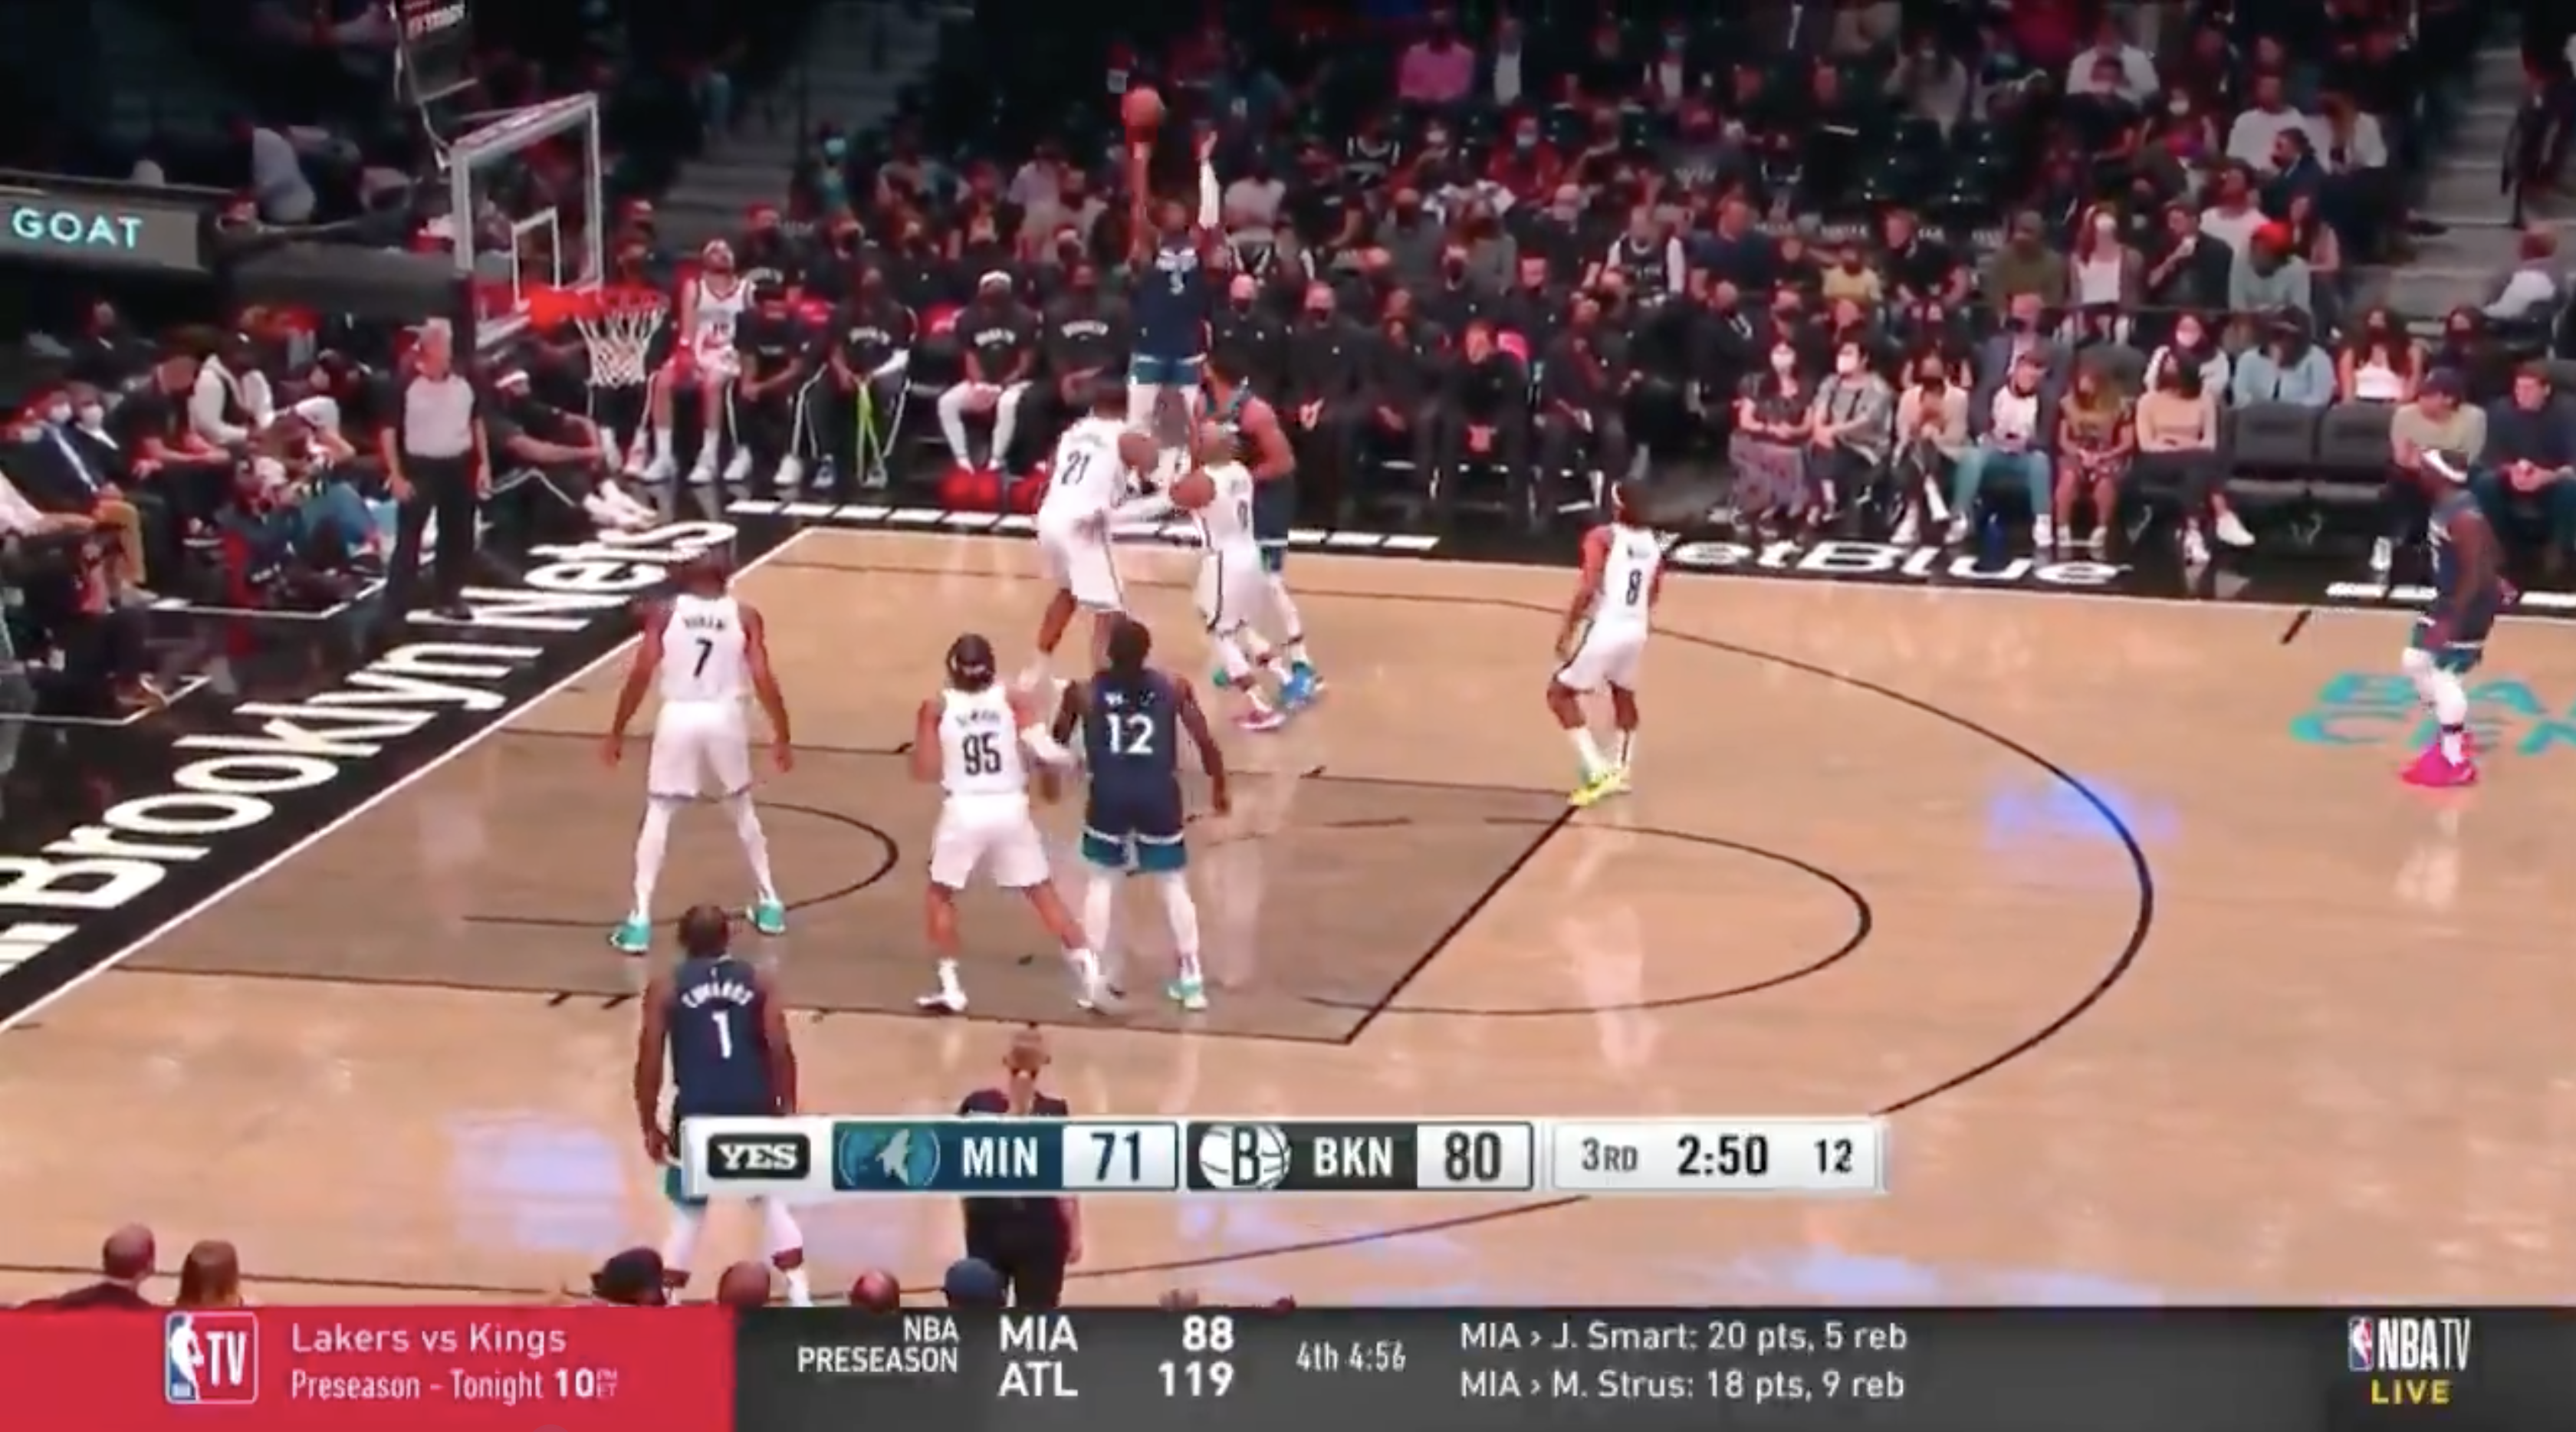 NBA Fans Are Upset With NBA TVs Ticker And Aspect Ratio Yet Again